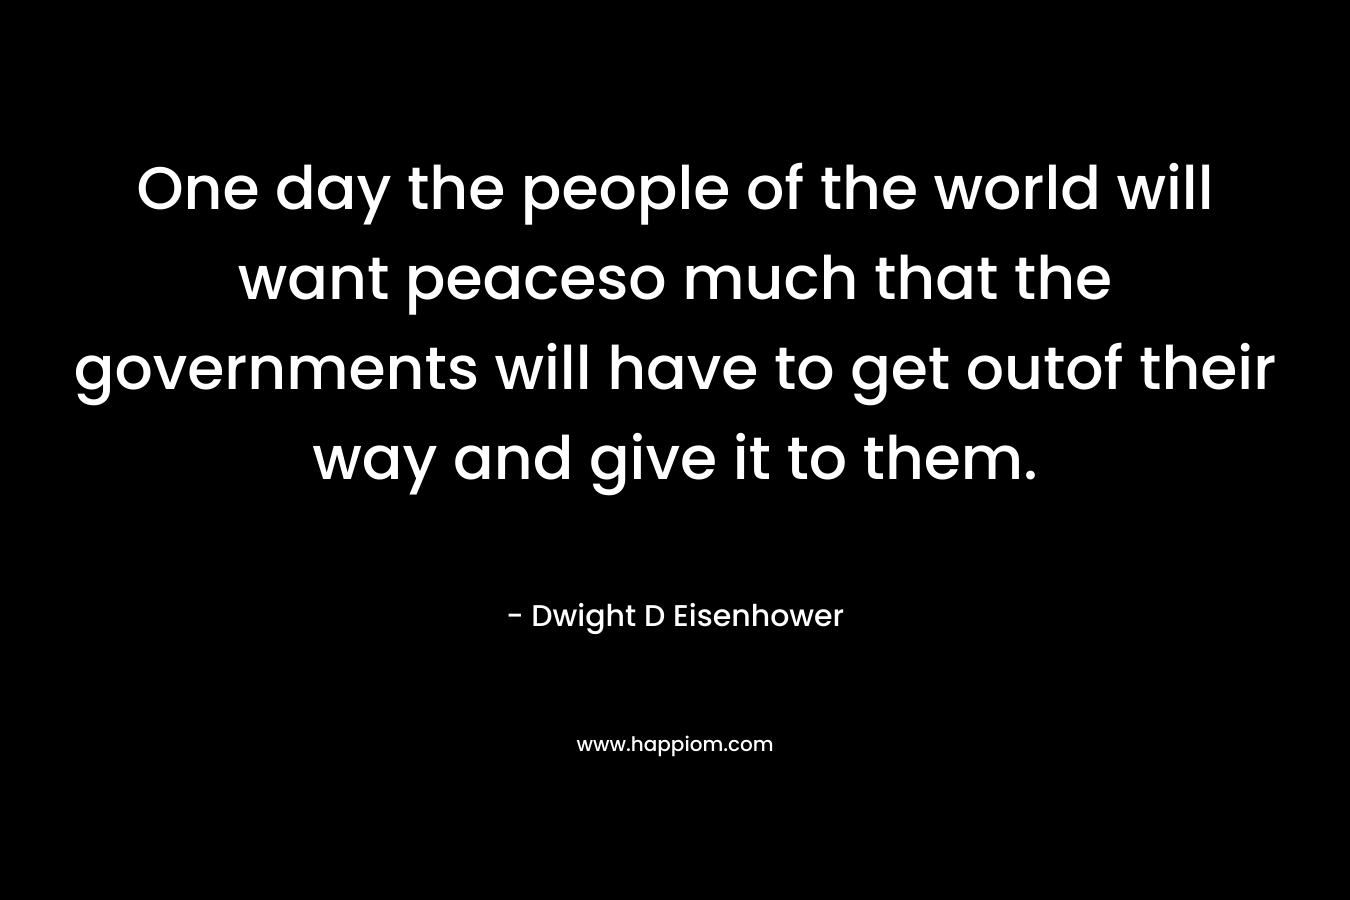 One day the people of the world will want peaceso much that the governments will have to get outof their way and give it to them.